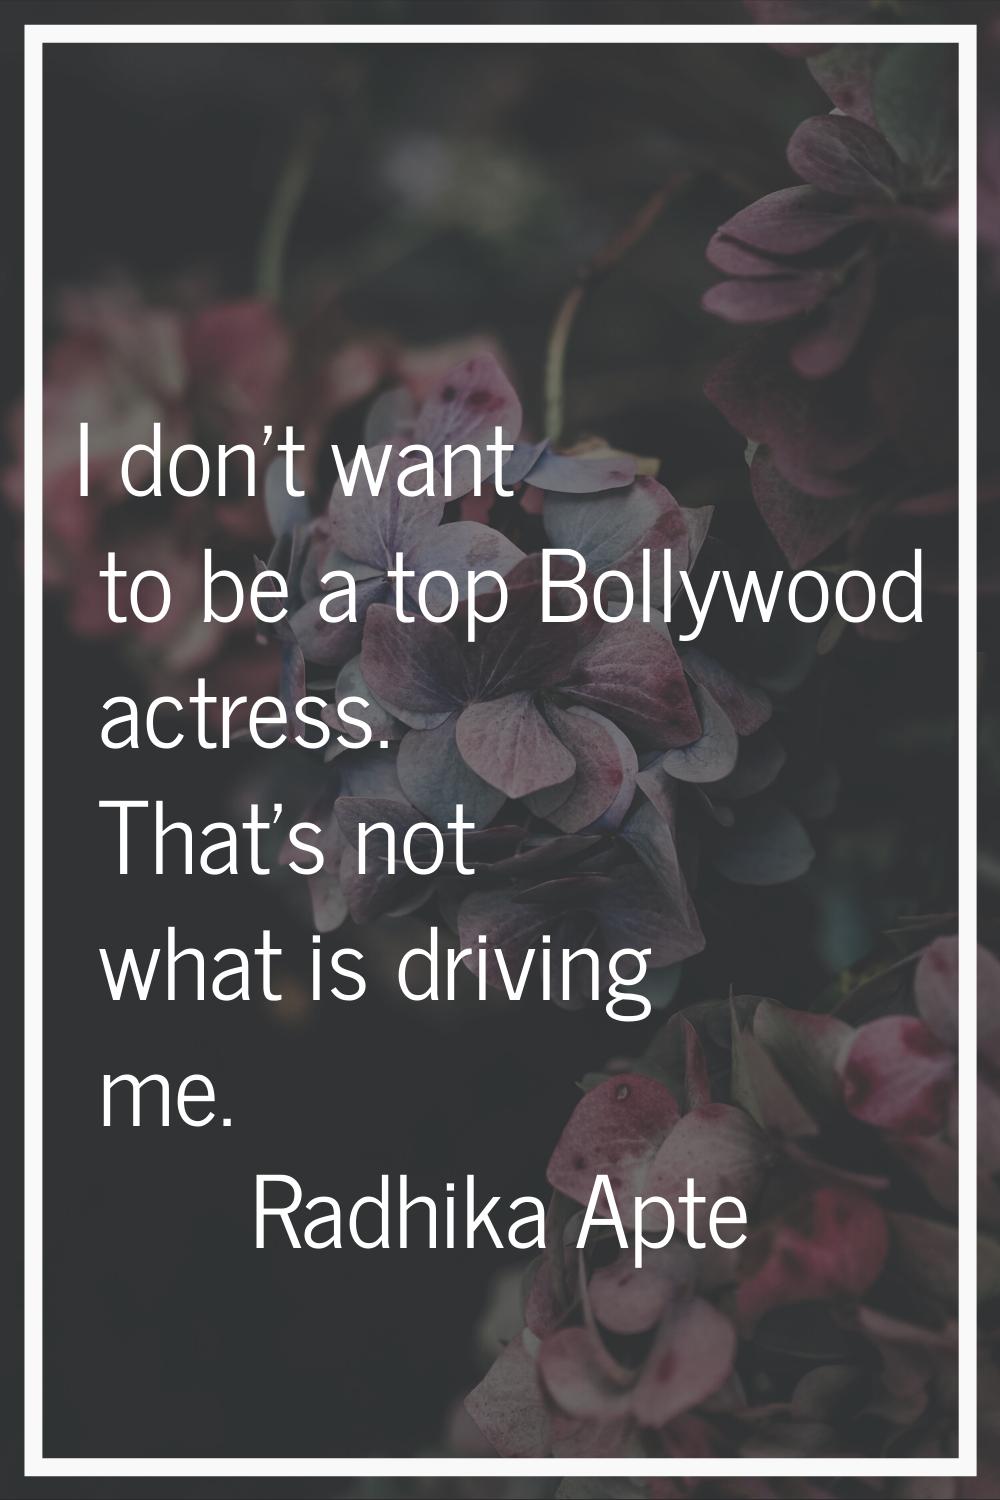 I don't want to be a top Bollywood actress. That's not what is driving me.